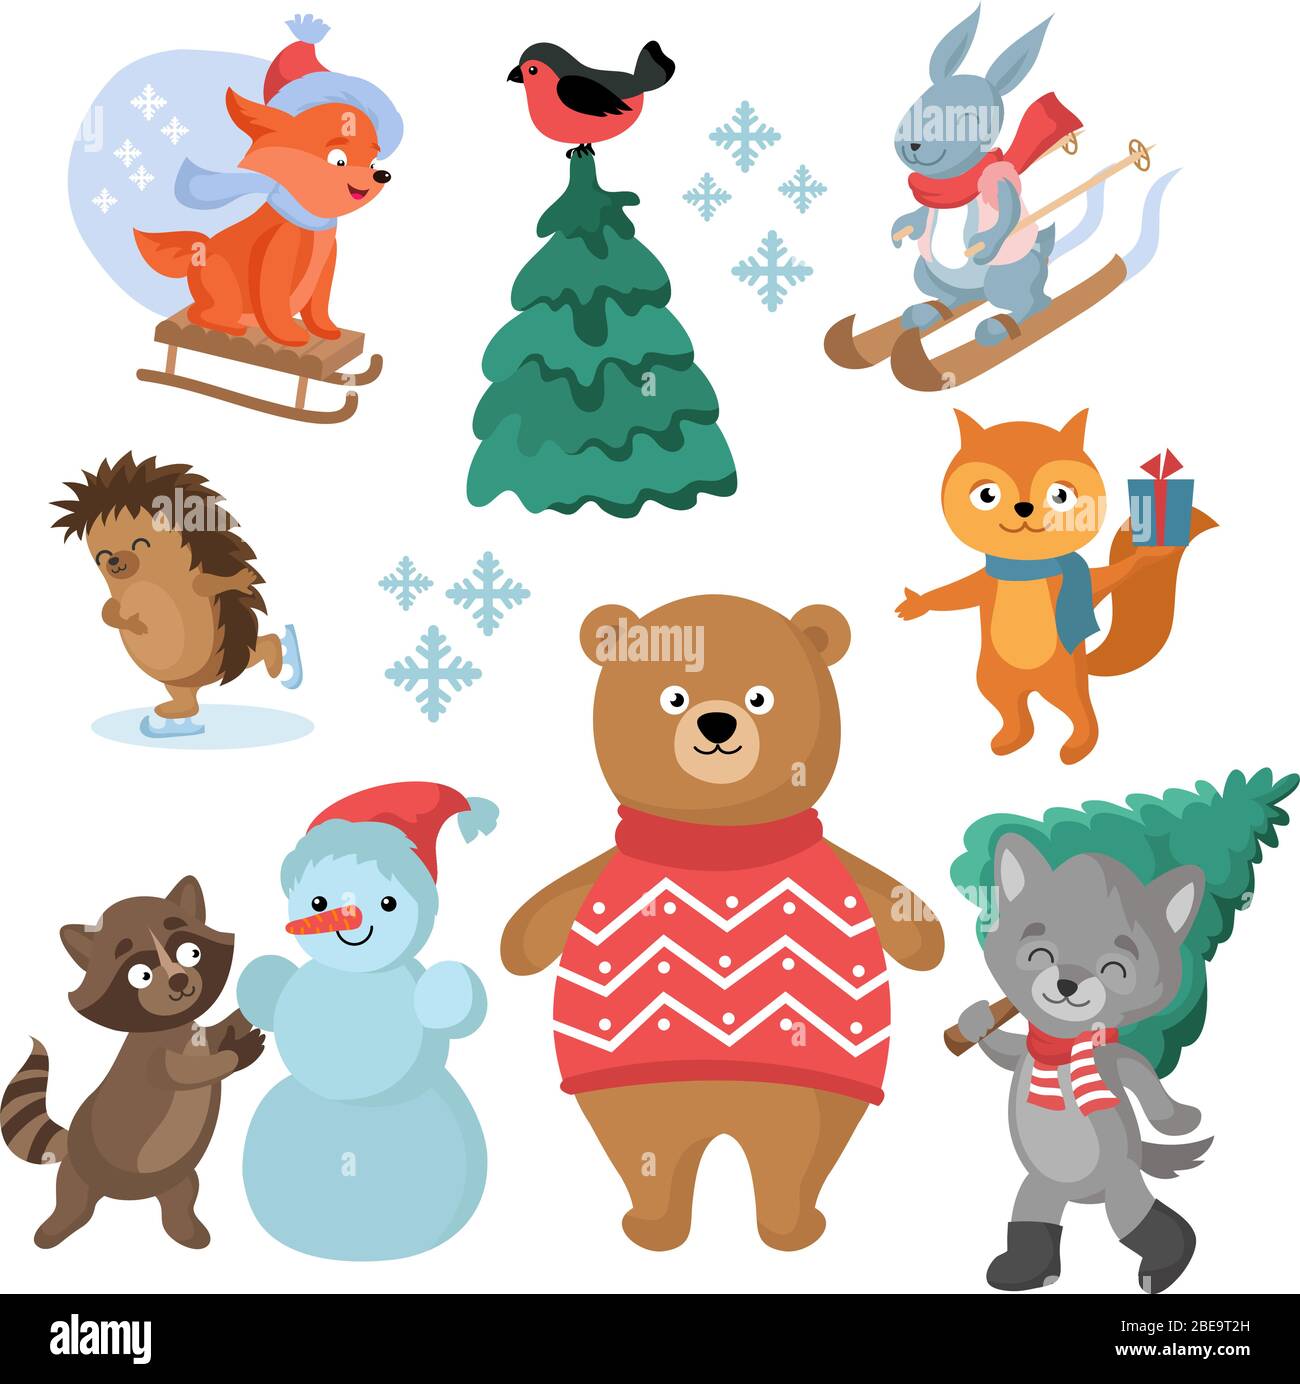 Christmas and winter holiday funny animals vector collection. Christmas animal and snowman illustration Stock Vector